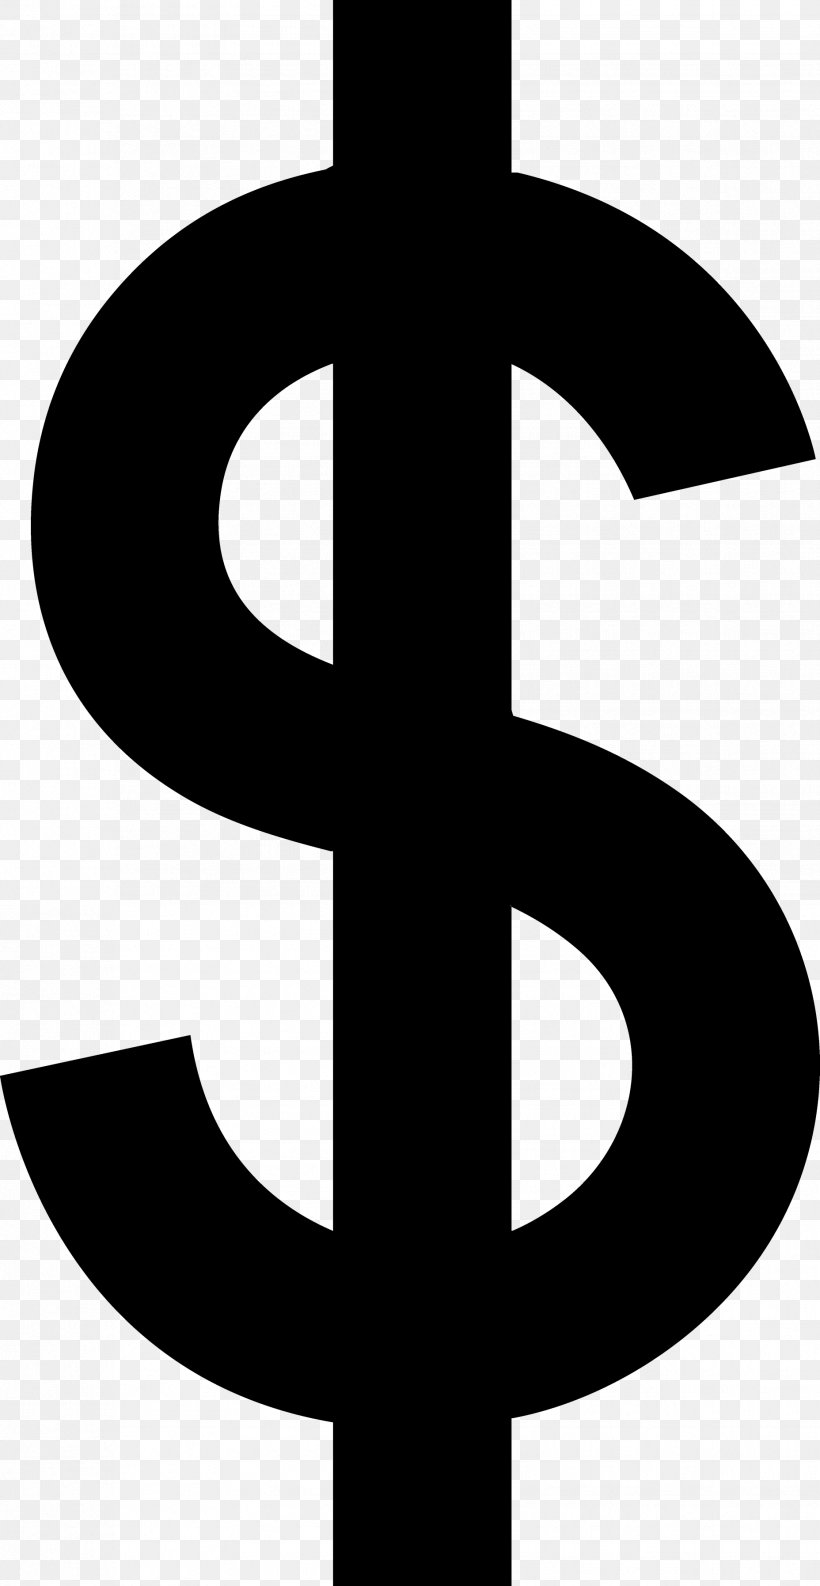 Dollar Sign Currency Symbol Clip Art, PNG, 1856x3590px, United States Dollar, Black And White, Dollar, Dollar Coin, Dollar Sign Download Free